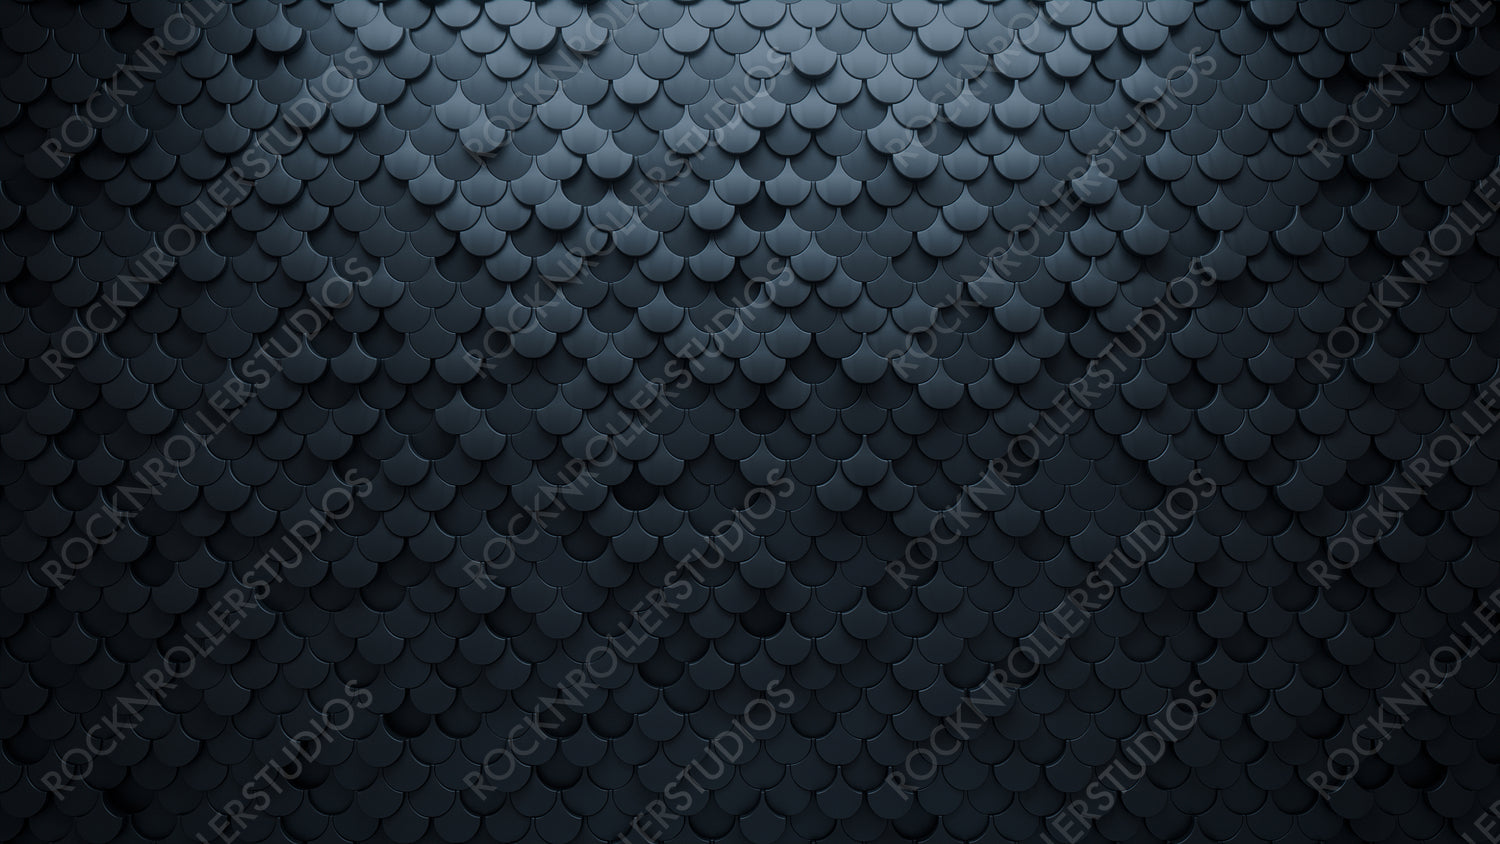 3D Tiles arranged to create a Black wall. Futuristic, Semigloss Background formed from Fish Scale blocks. 3D Render